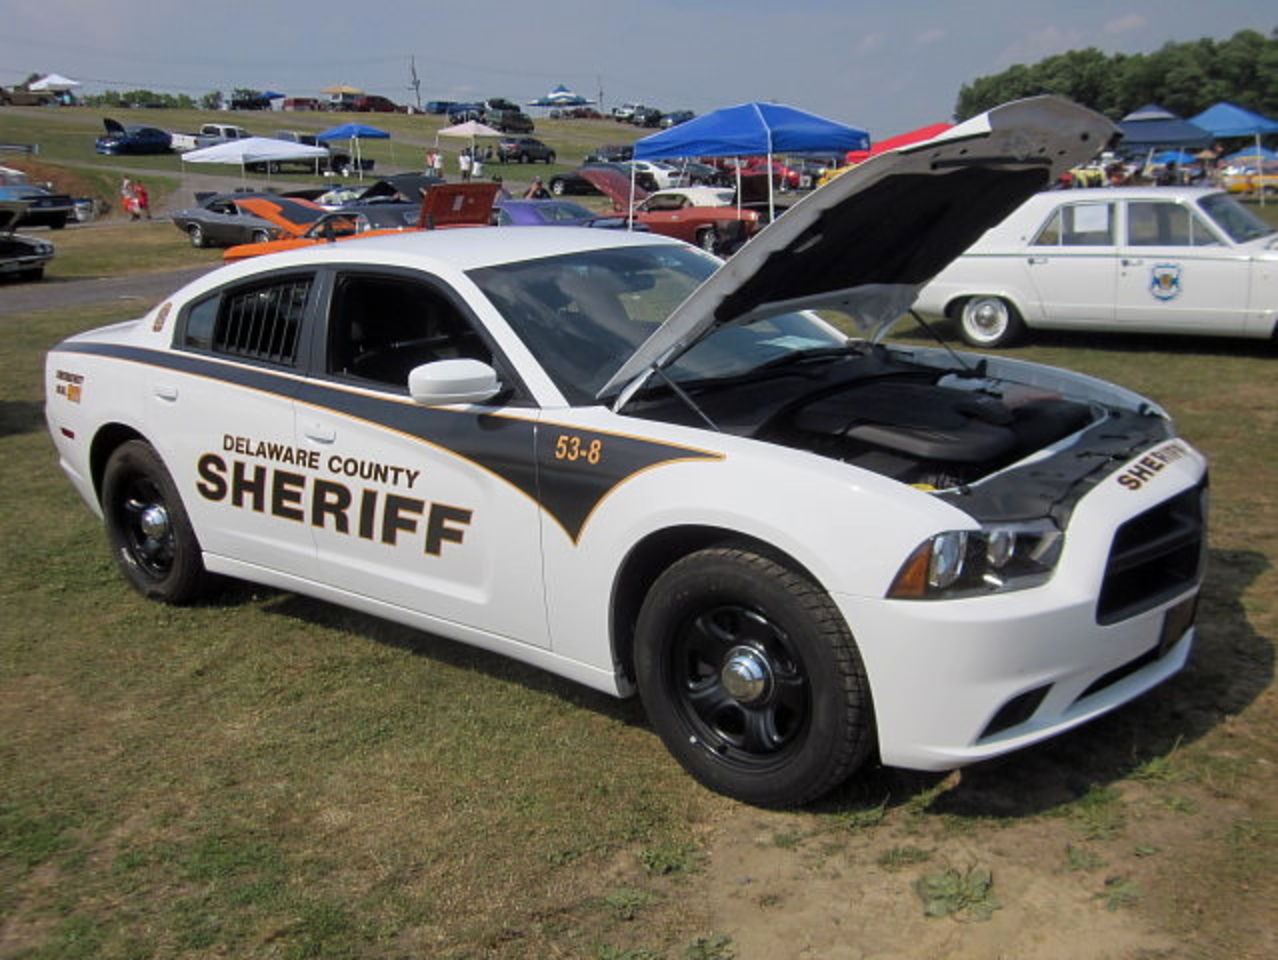 2011 Dodge Charger Squad (Delaware County Sheriff) | Flickr ...